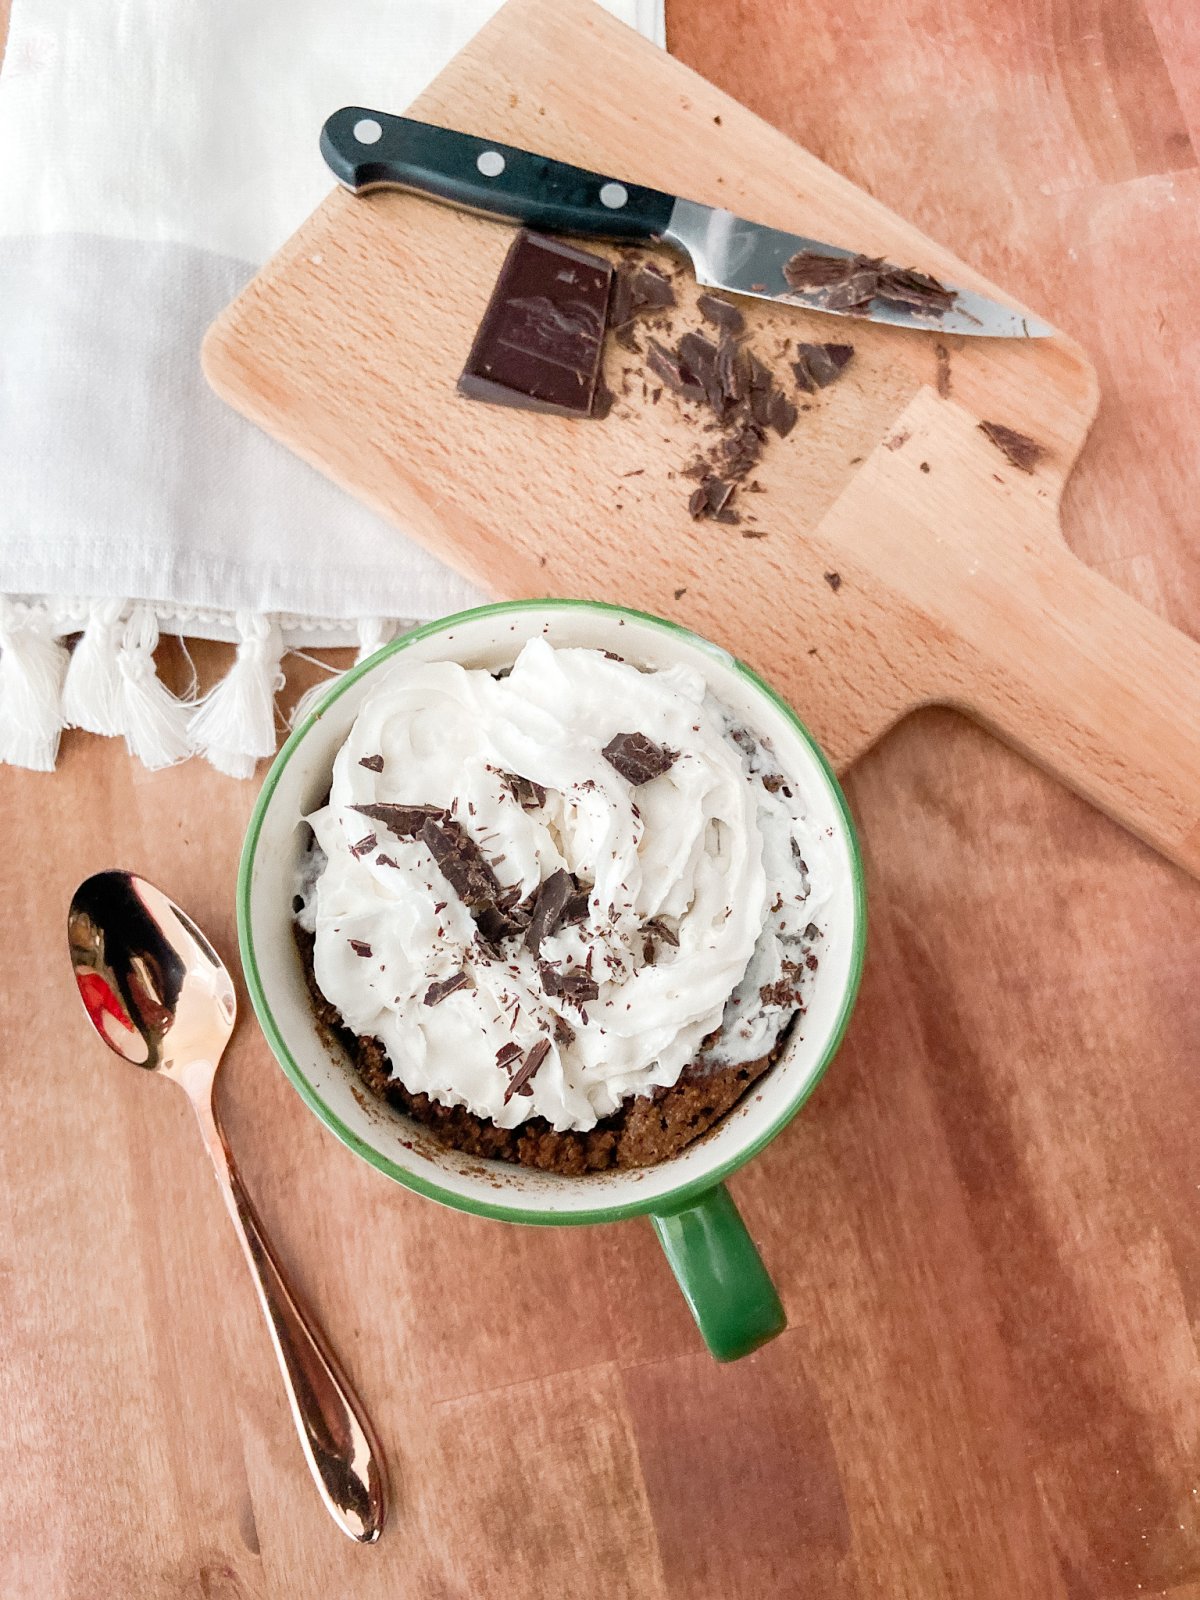 The Easiest 5-Minute Low-Carb Keto Chocolate Mug Cake! Need a sweet treat but want to stay on track? Make this easy cake for one!